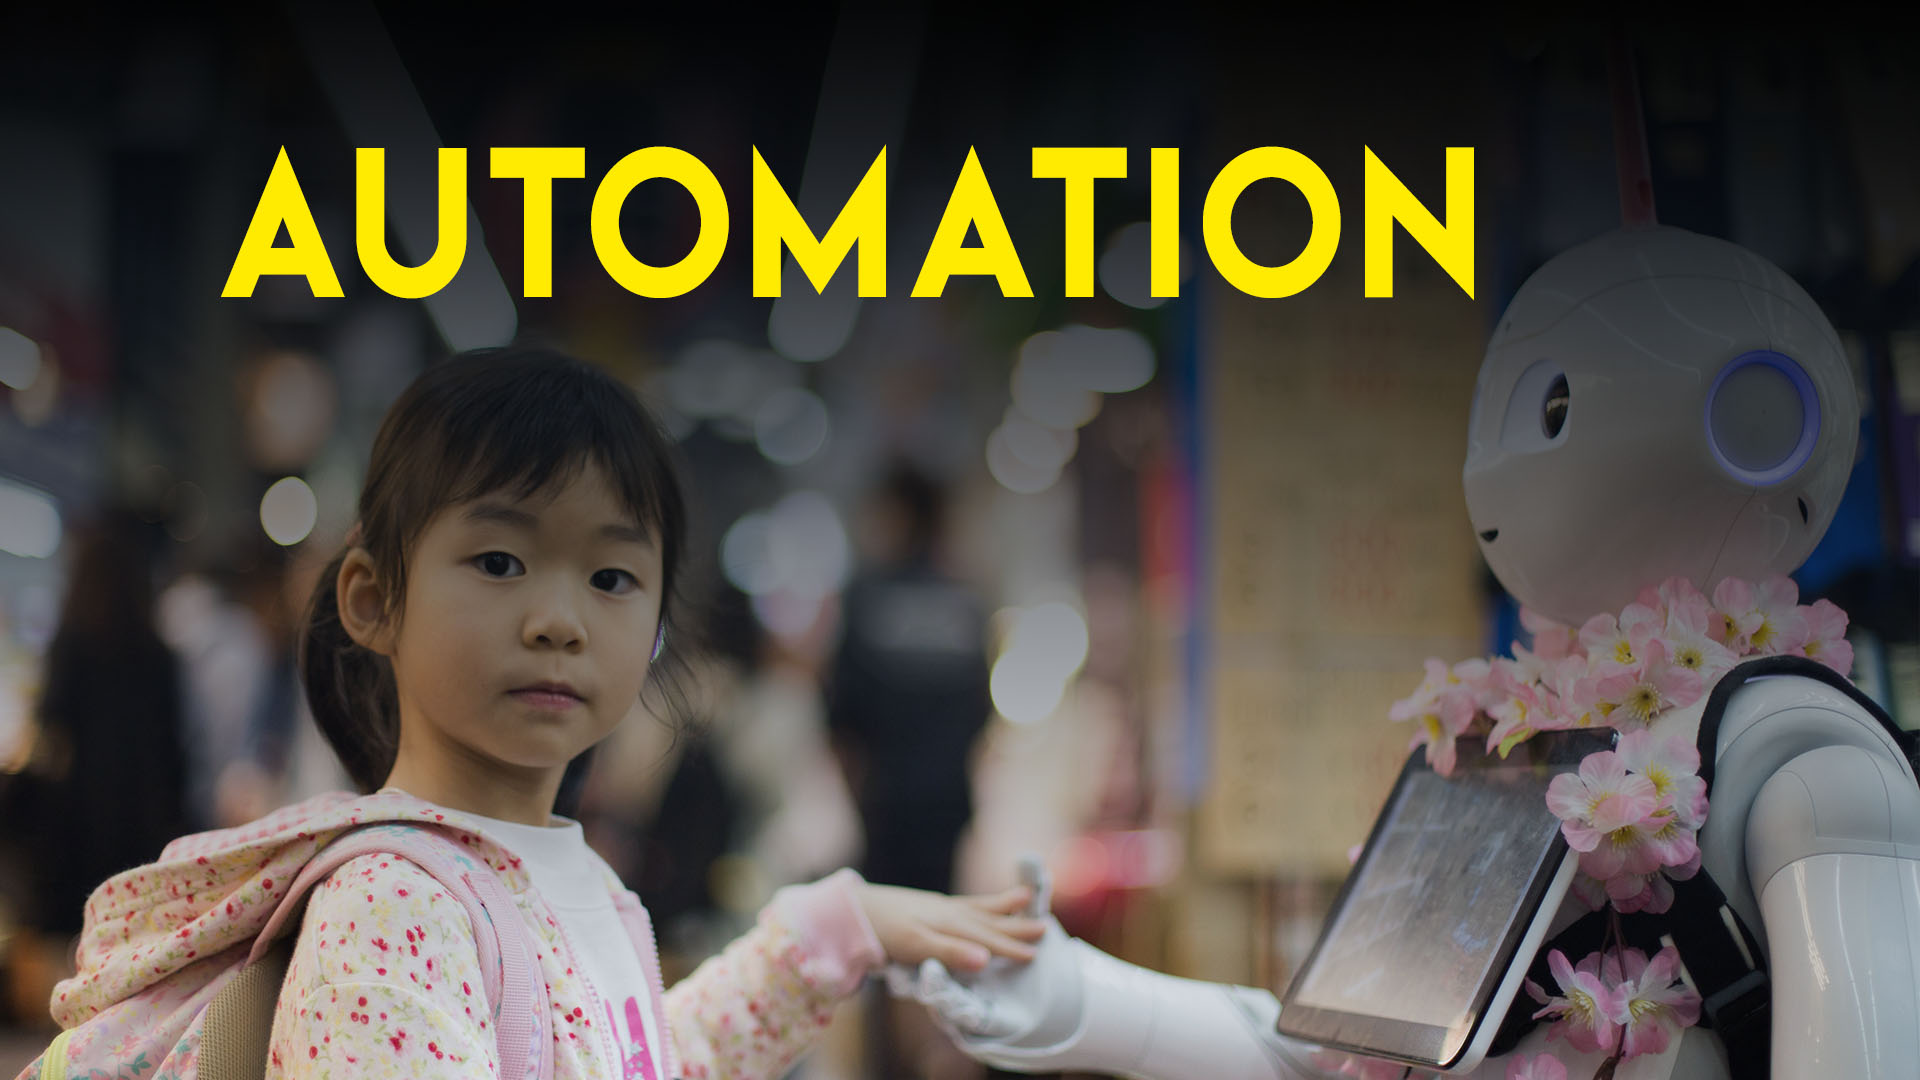 automation definition